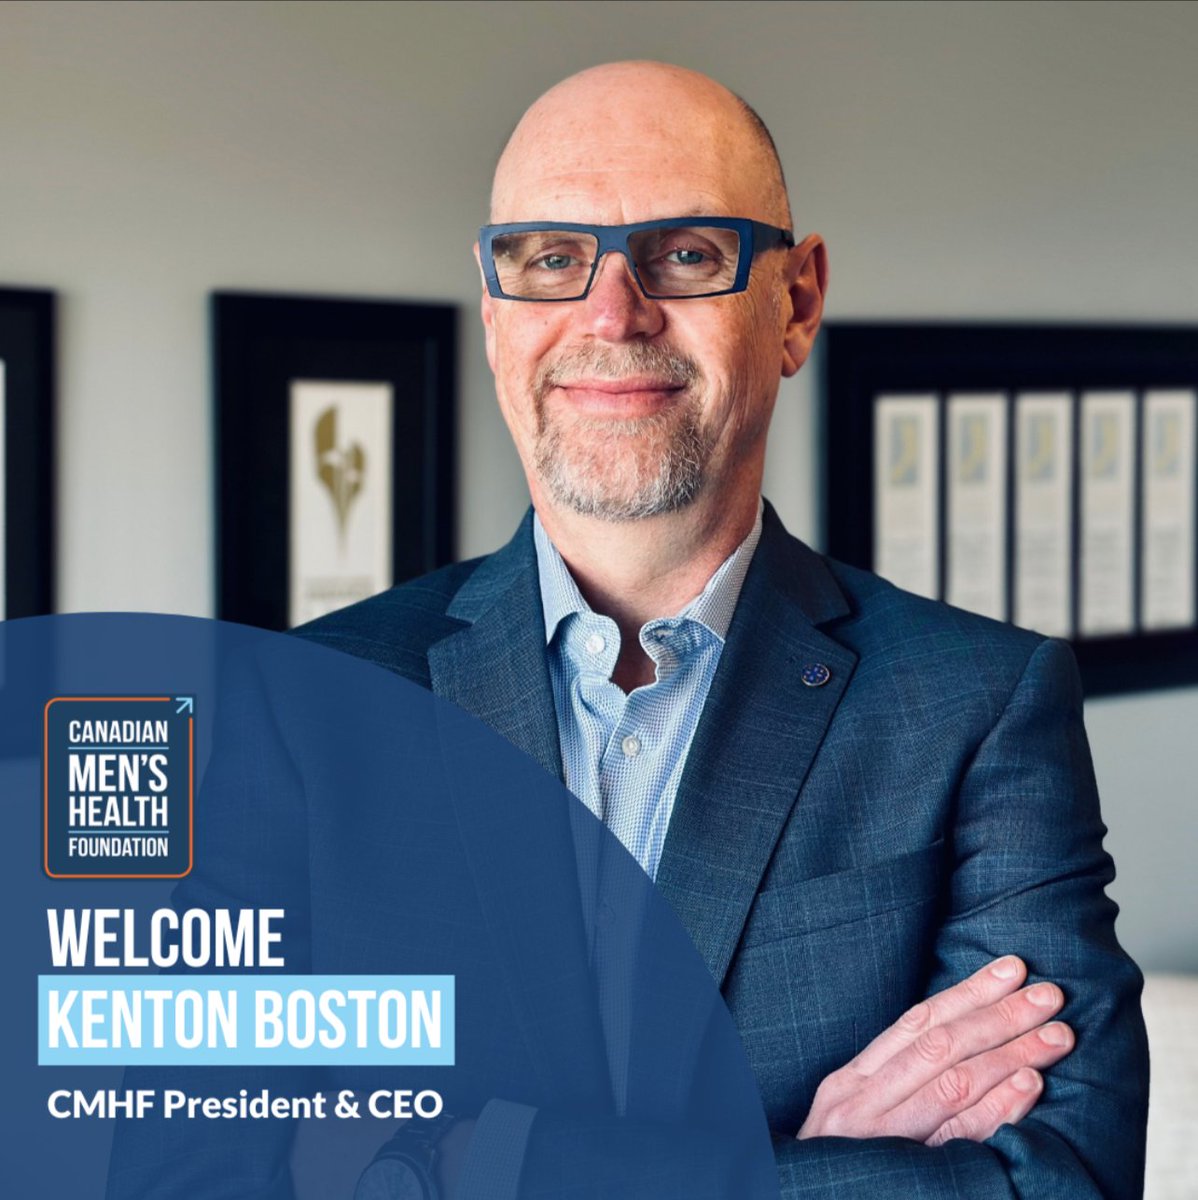 CMHF is proud to welcome Kenton Boston as President & CEO. He joins the team after a successful career leading major news assets for Global News and Corus Entertainment. Read full release → dcm.tips/3Q9Mwl7